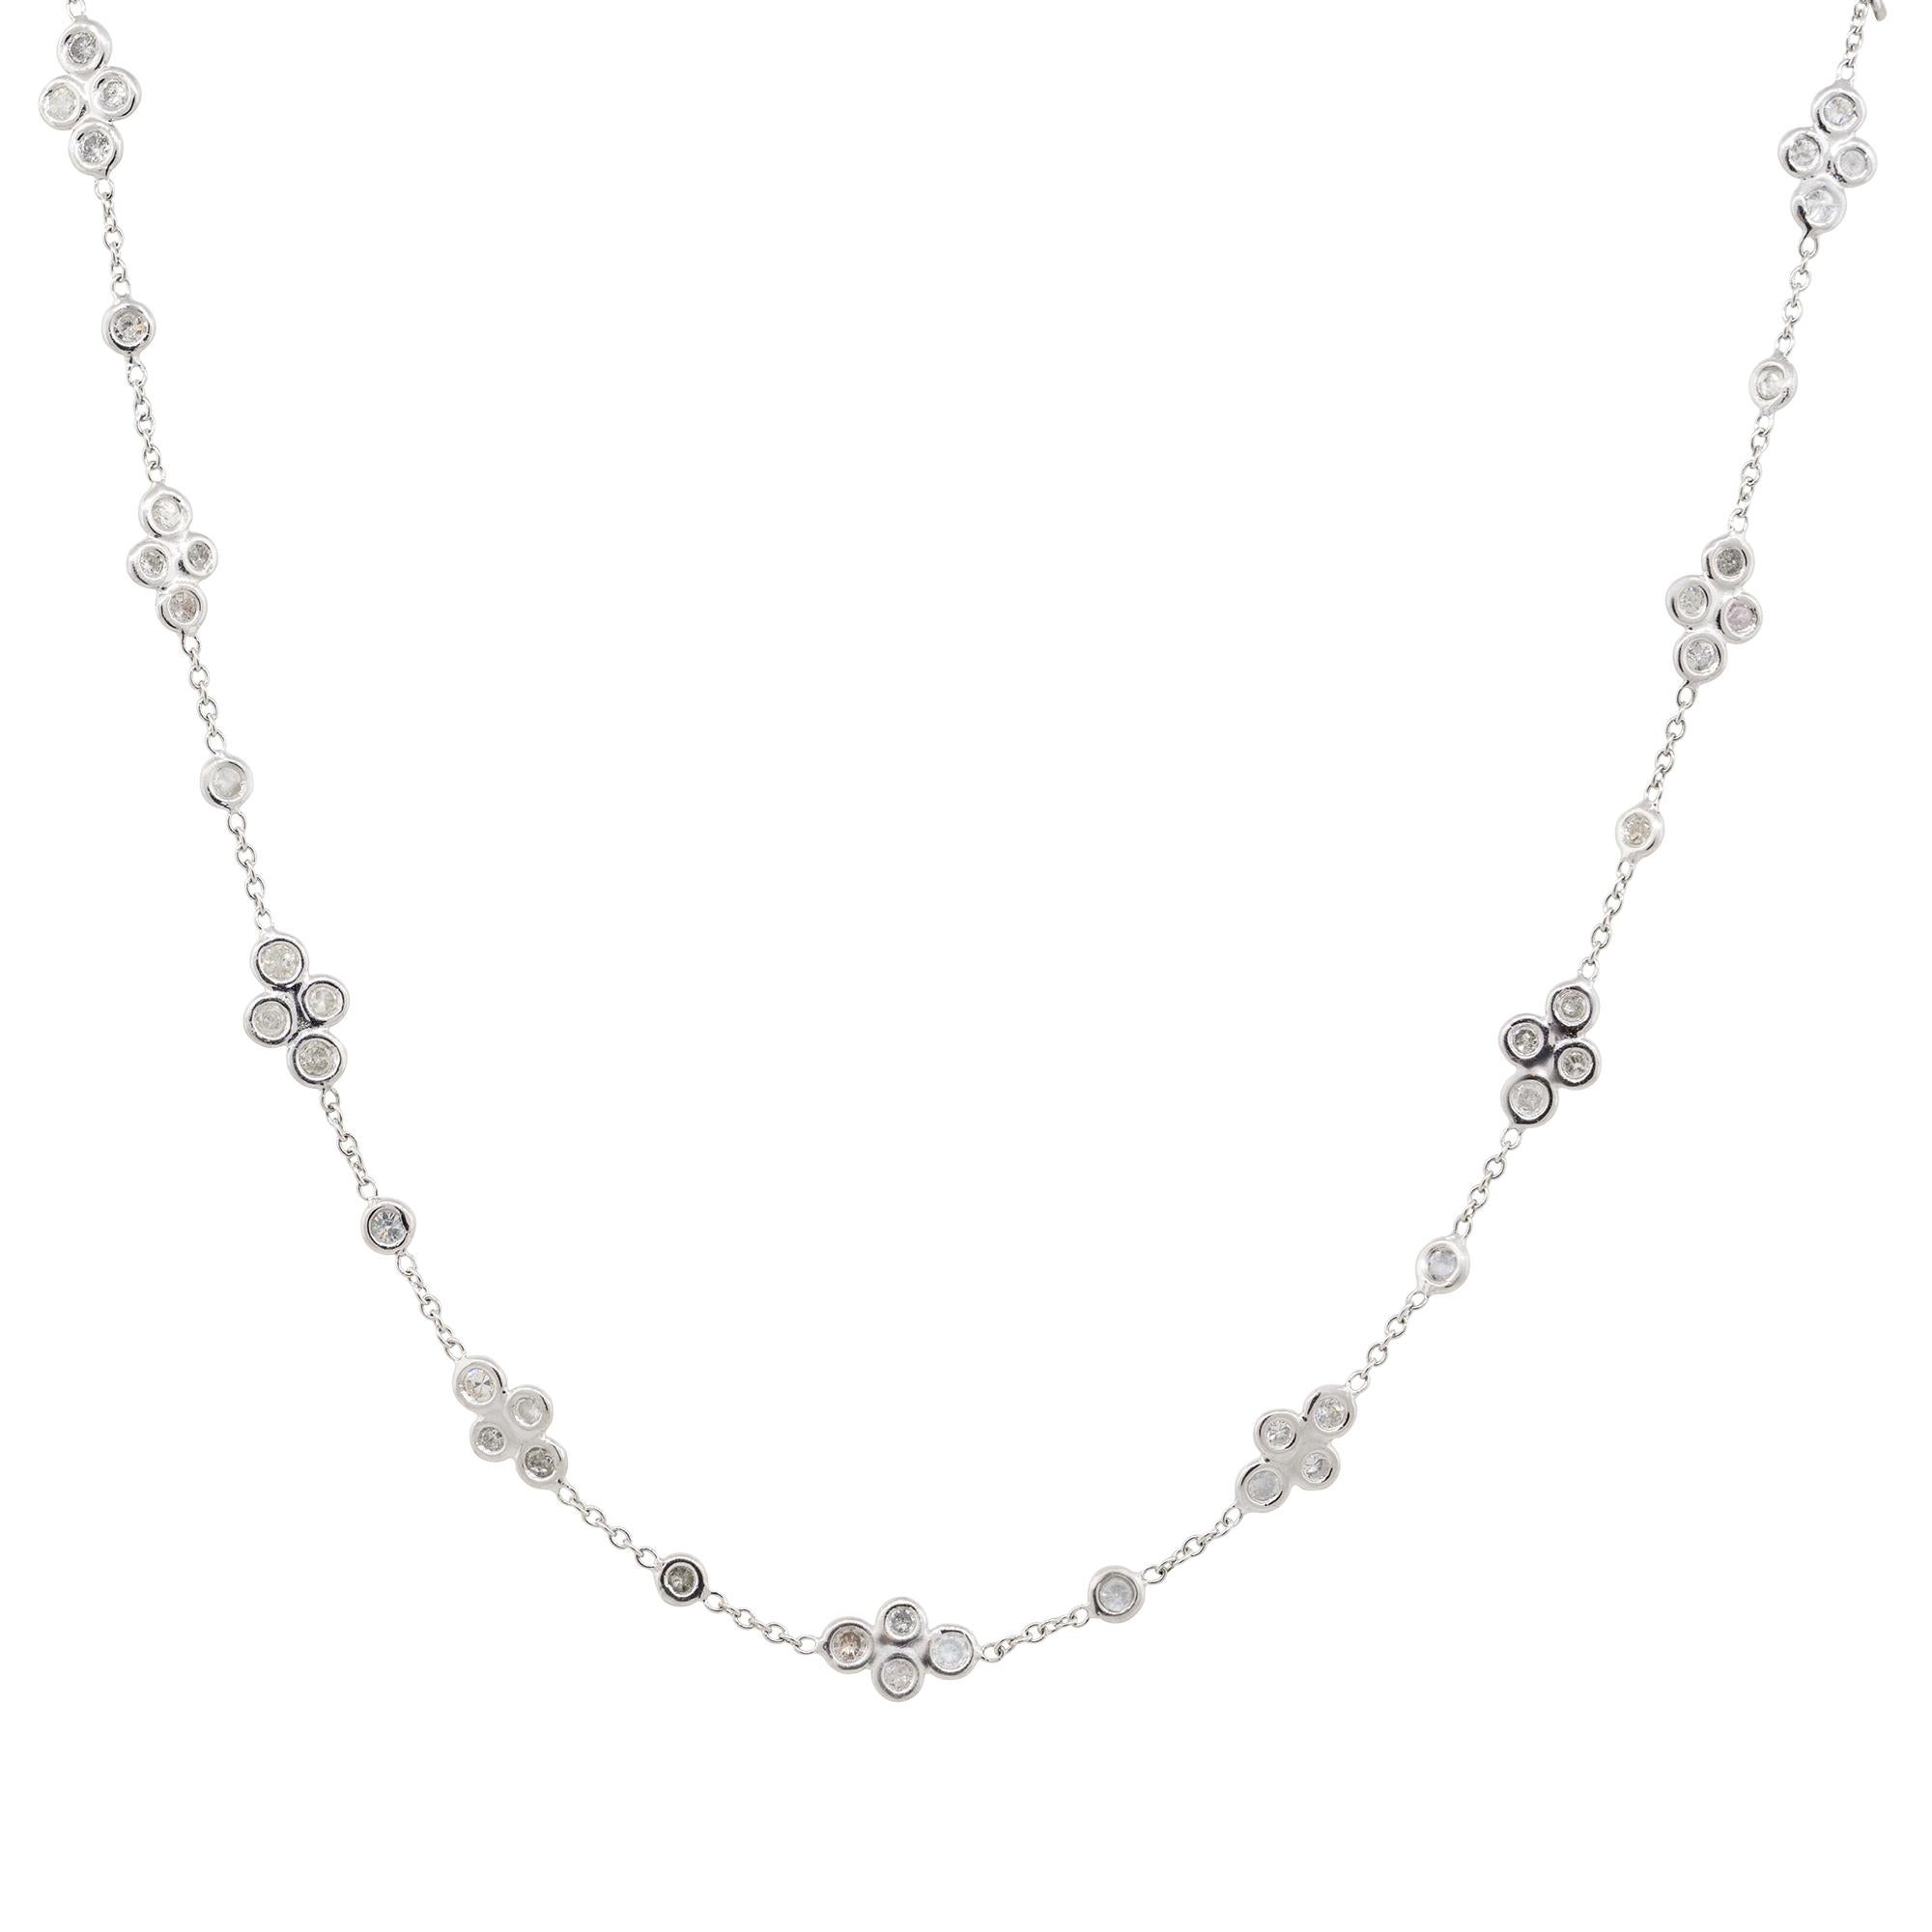 Material: 18k White Gold (clasp is 14k white gold)
Diamond Details: Approx. 1.9ctw of round cut diamonds. Diamonds are G/H in color and VS in clarity
Measurements: Necklace measures 16